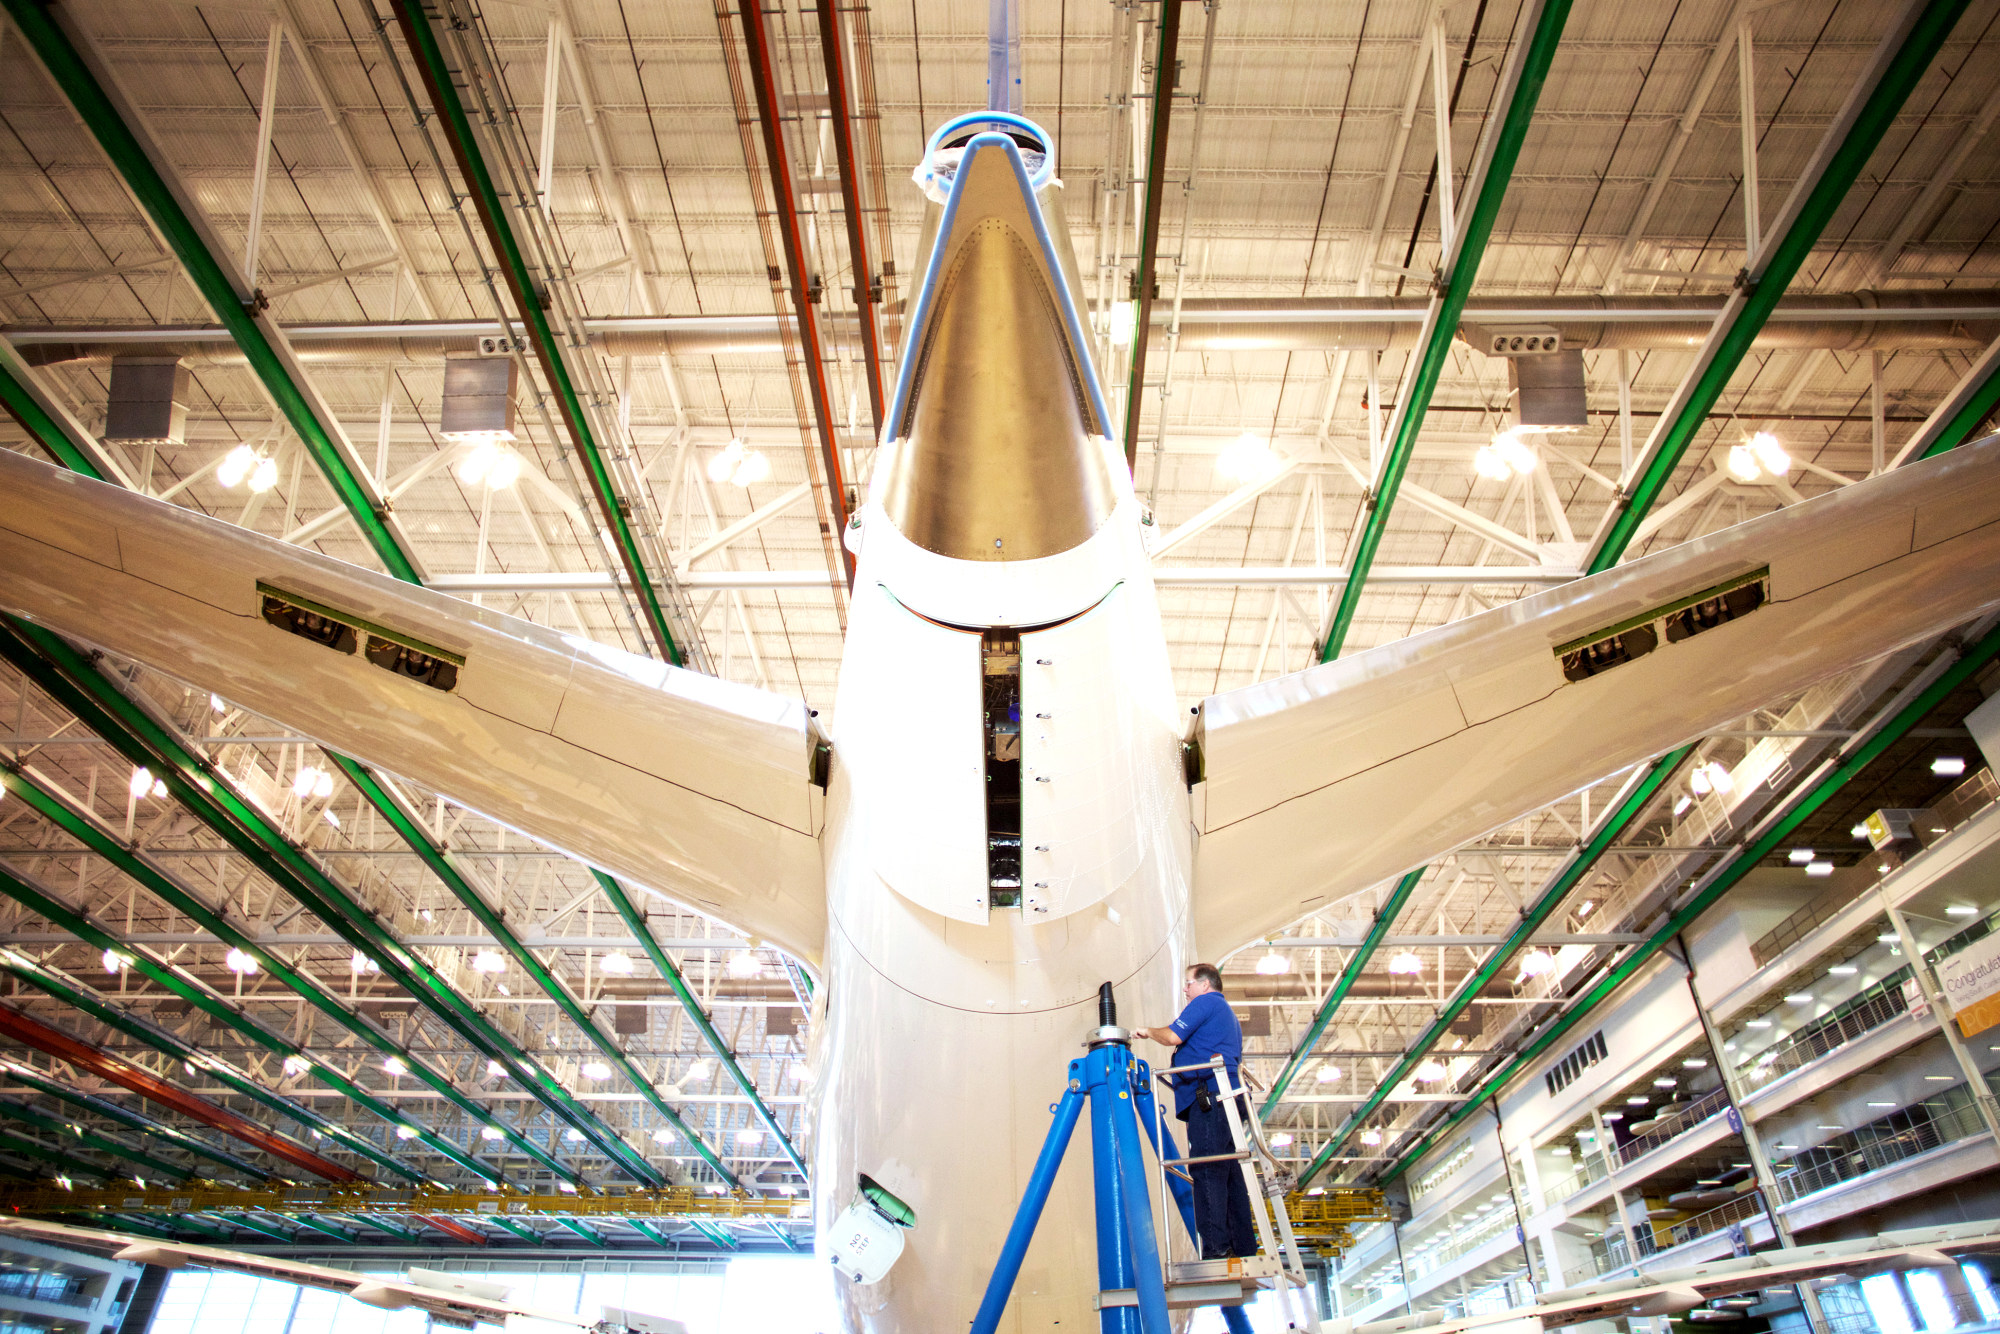 An employee works on the tail of a Boeing Dreamliner 787 plane on the production line at the company's final assembly facility in North Charleston, South Carolina.